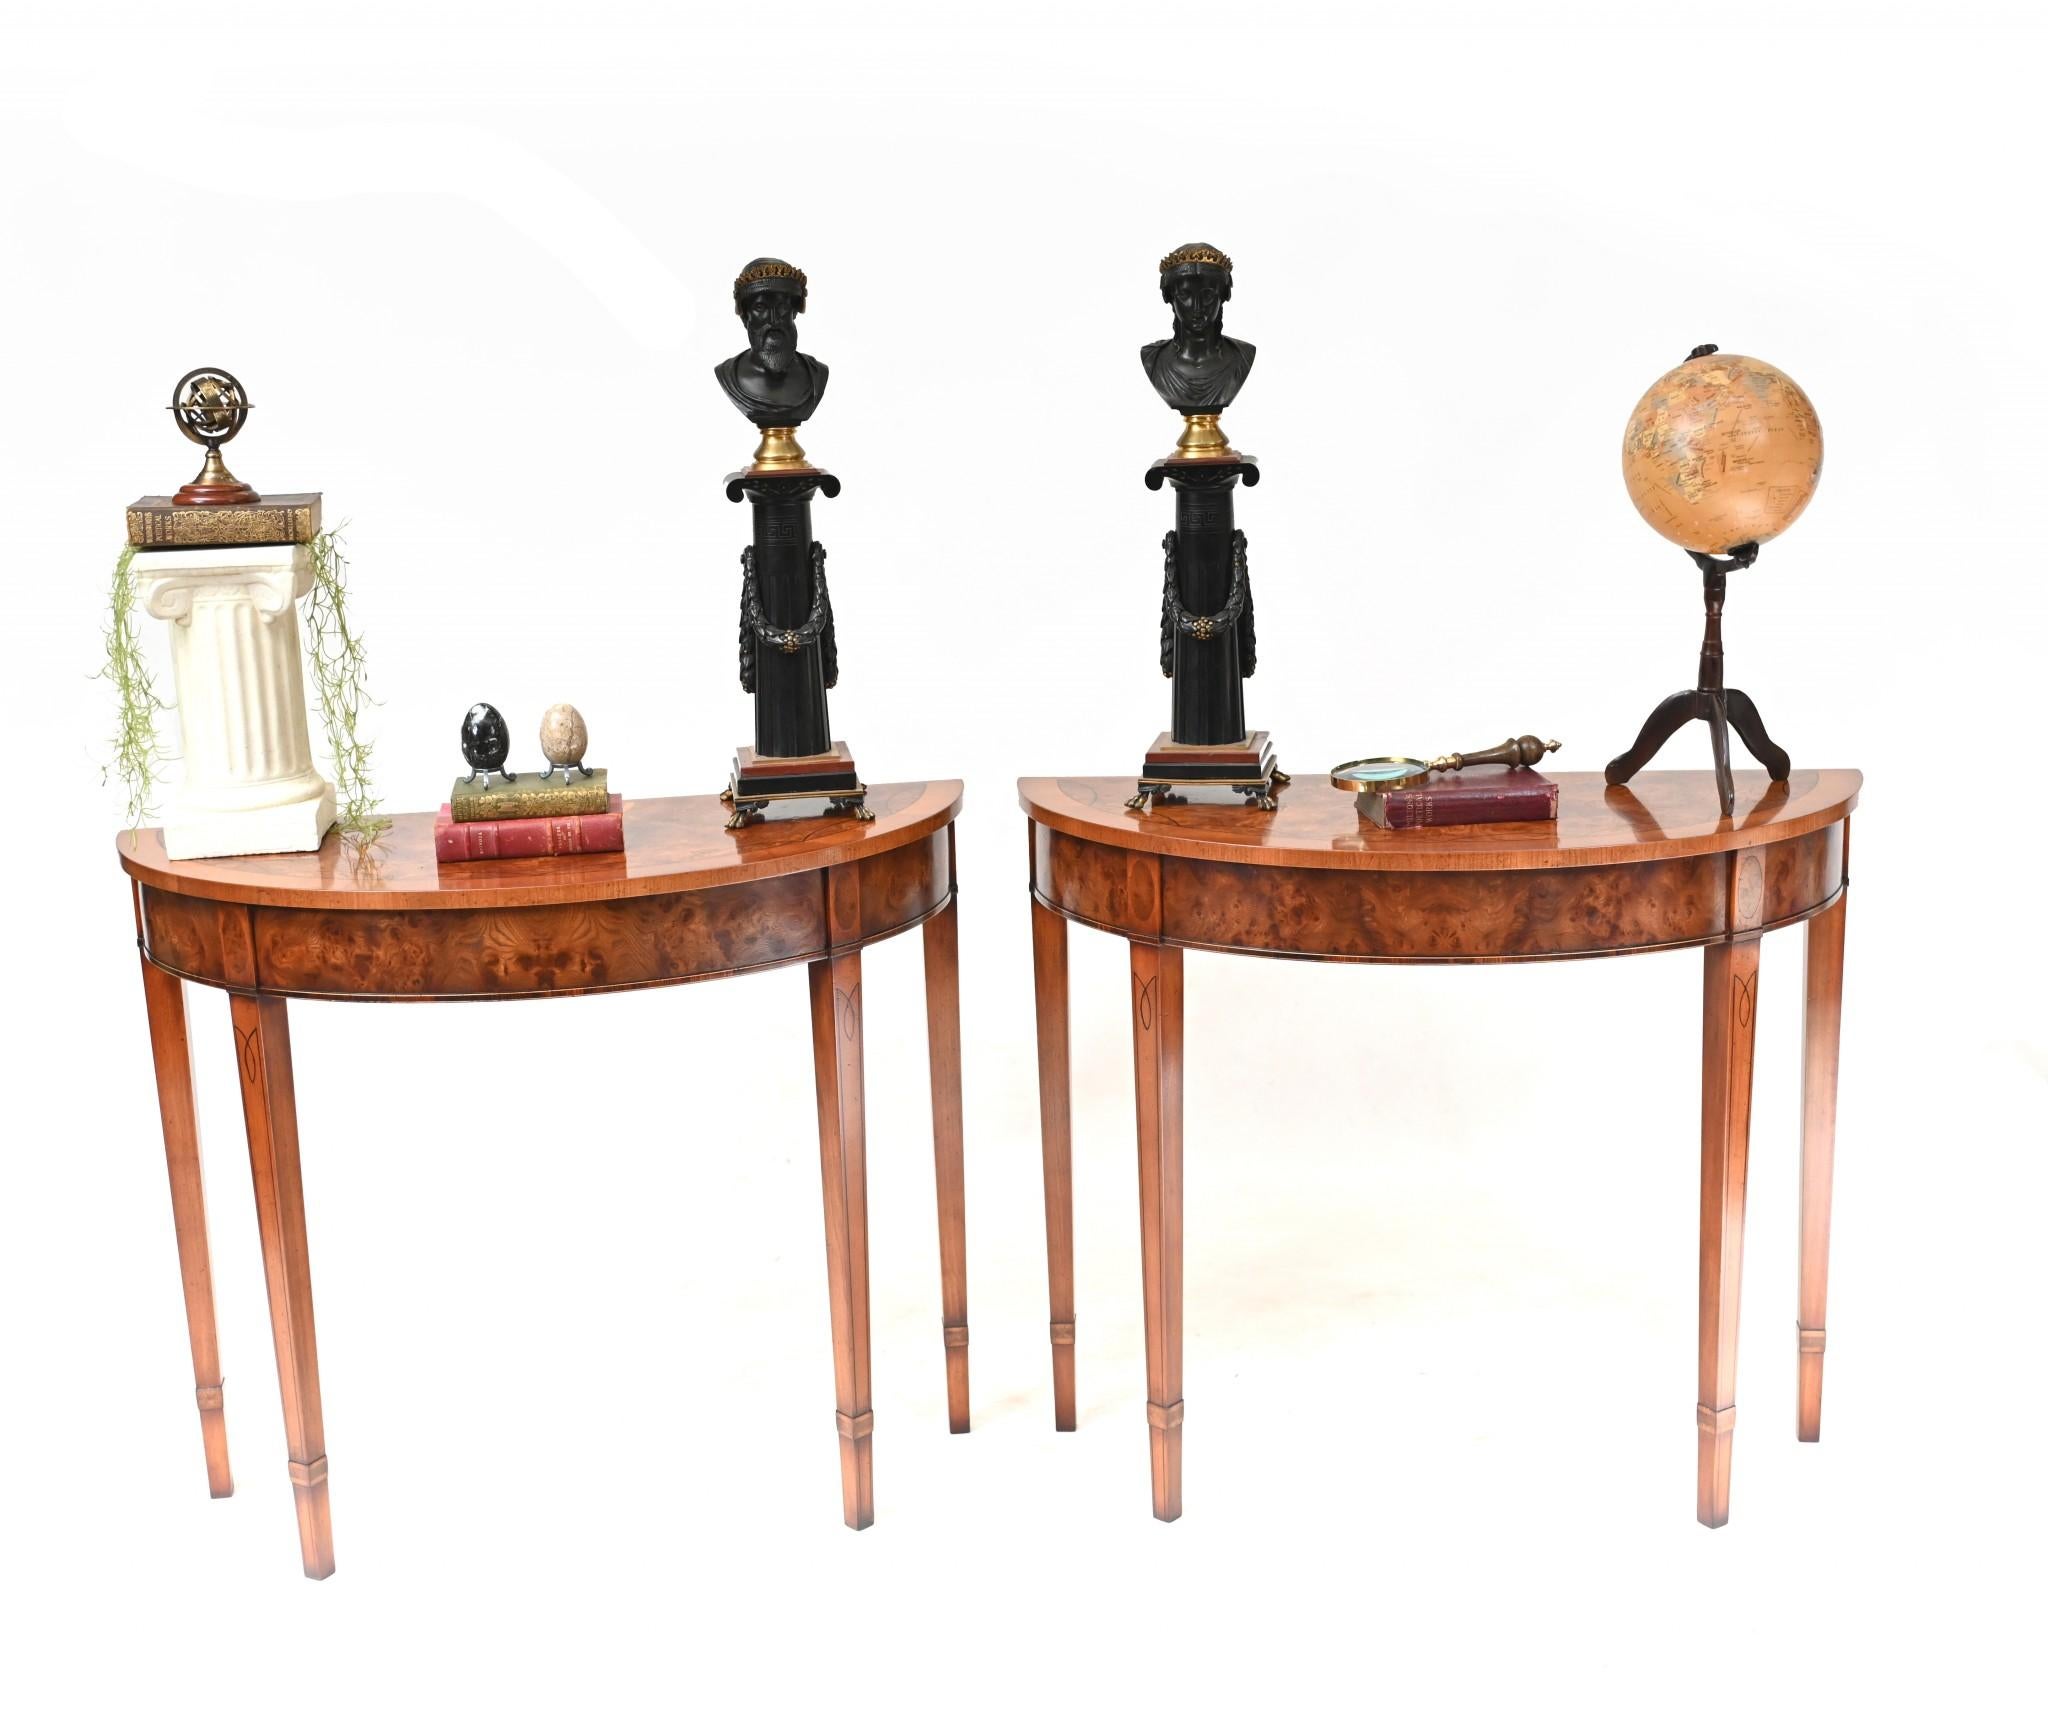 Pair opulent walnut console tables in the Regency manner
Features intricate inlay work including crossbanding and a shell motif to the centre in satinwood
Demi lune - half moon - form
Classically refined with clean design and tapered legs
Great